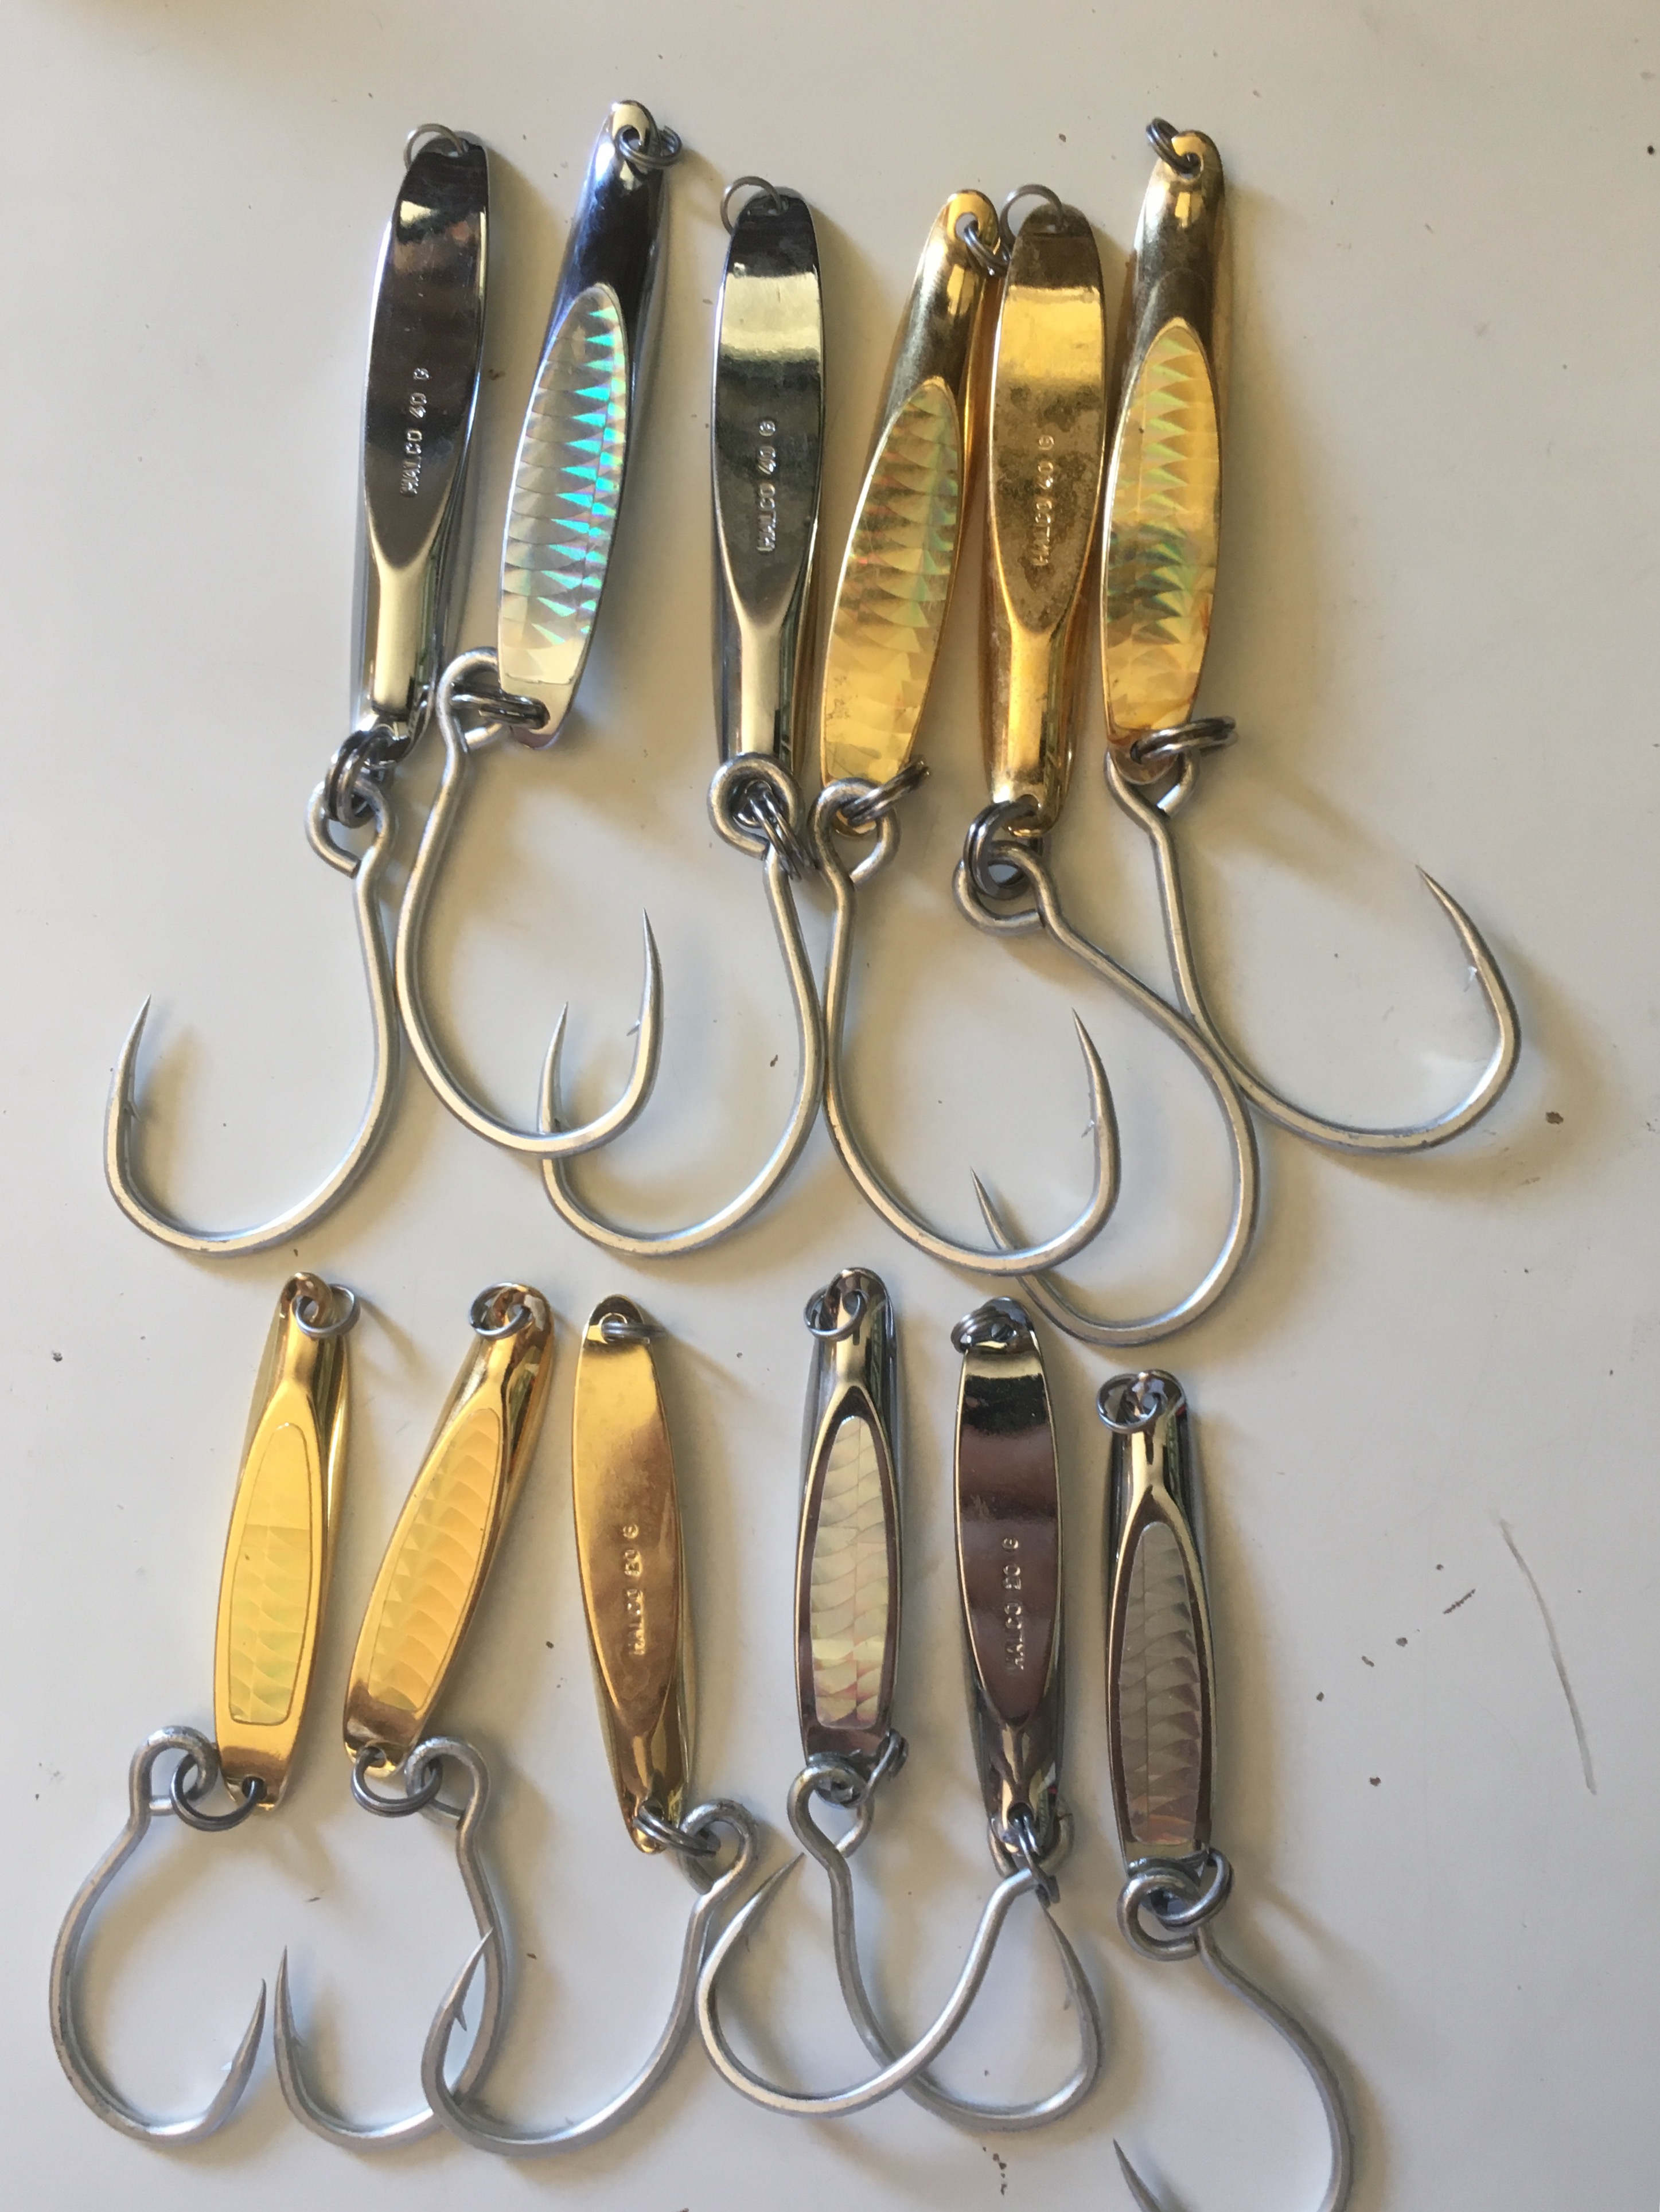 New to lure fishing - Fishing Chat - DECKEE Community